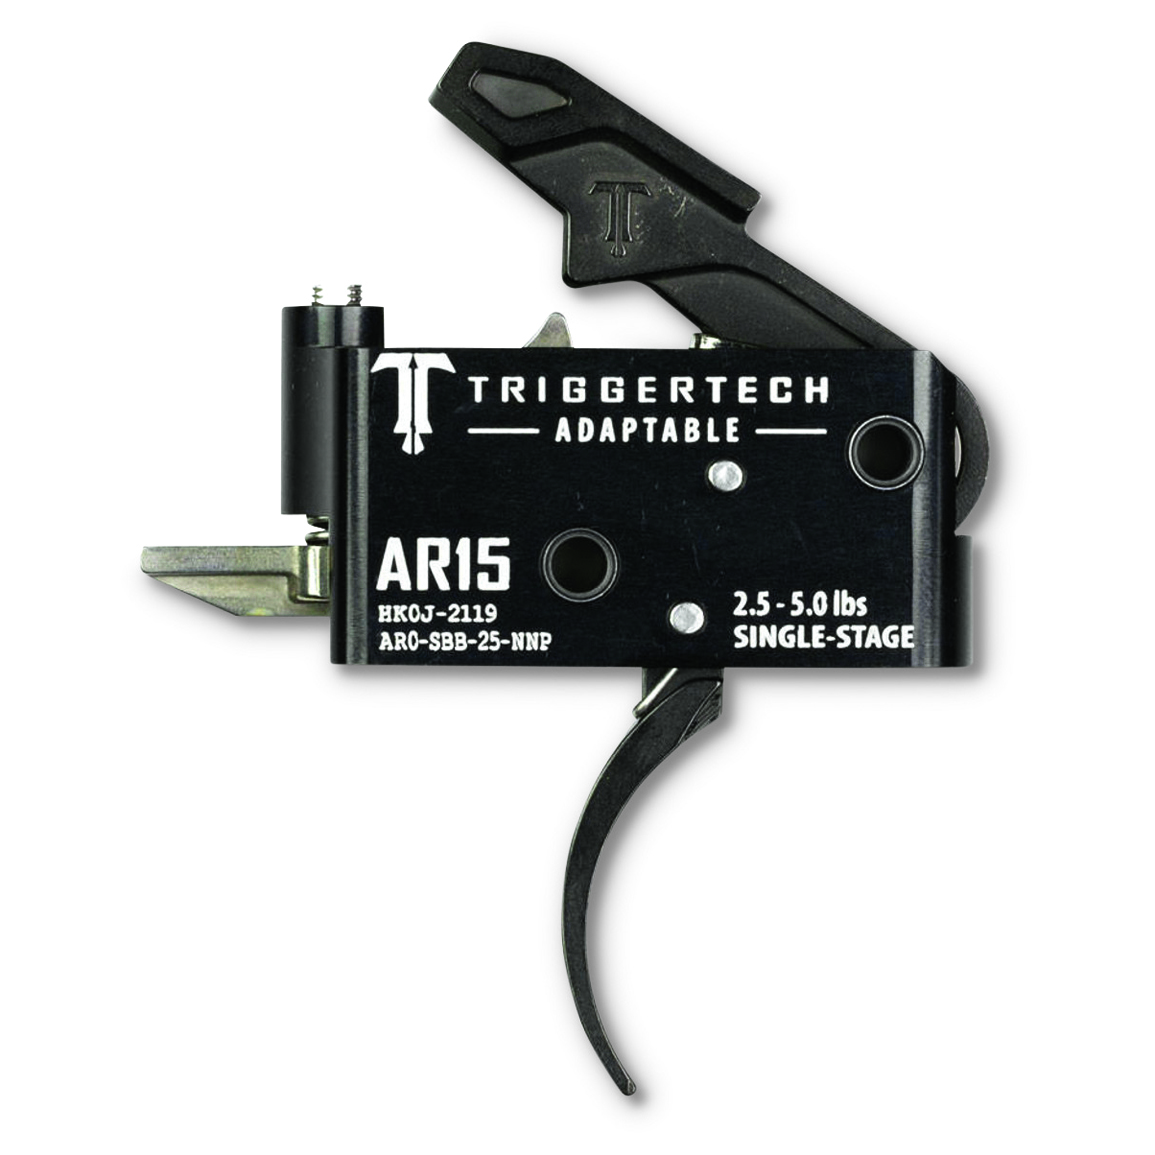 TriggerTech AR-15 Adaptable Single-Stage Curved Trigger, 2.5-5 lbs., Black